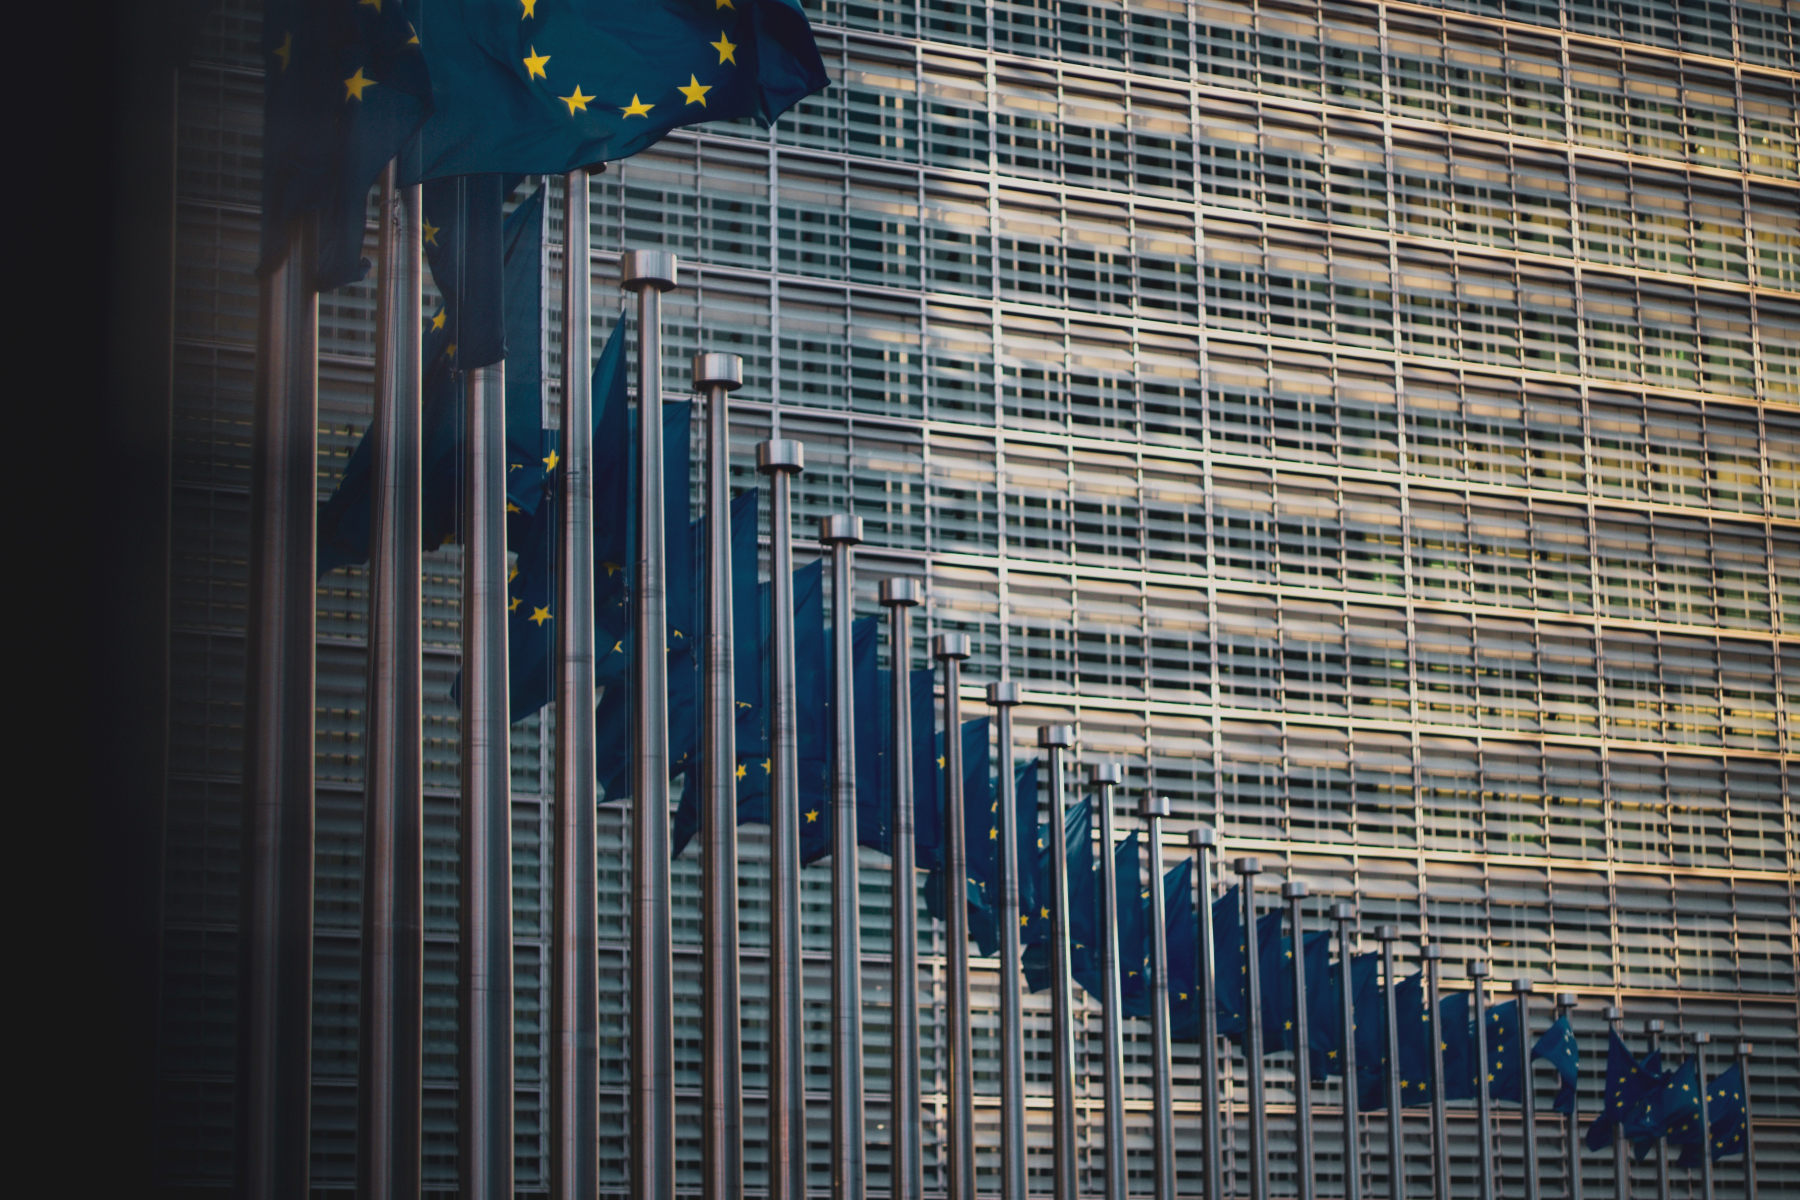 ECB raises interest rate by 0.5 percent, what does this mean for Bitcoin?
